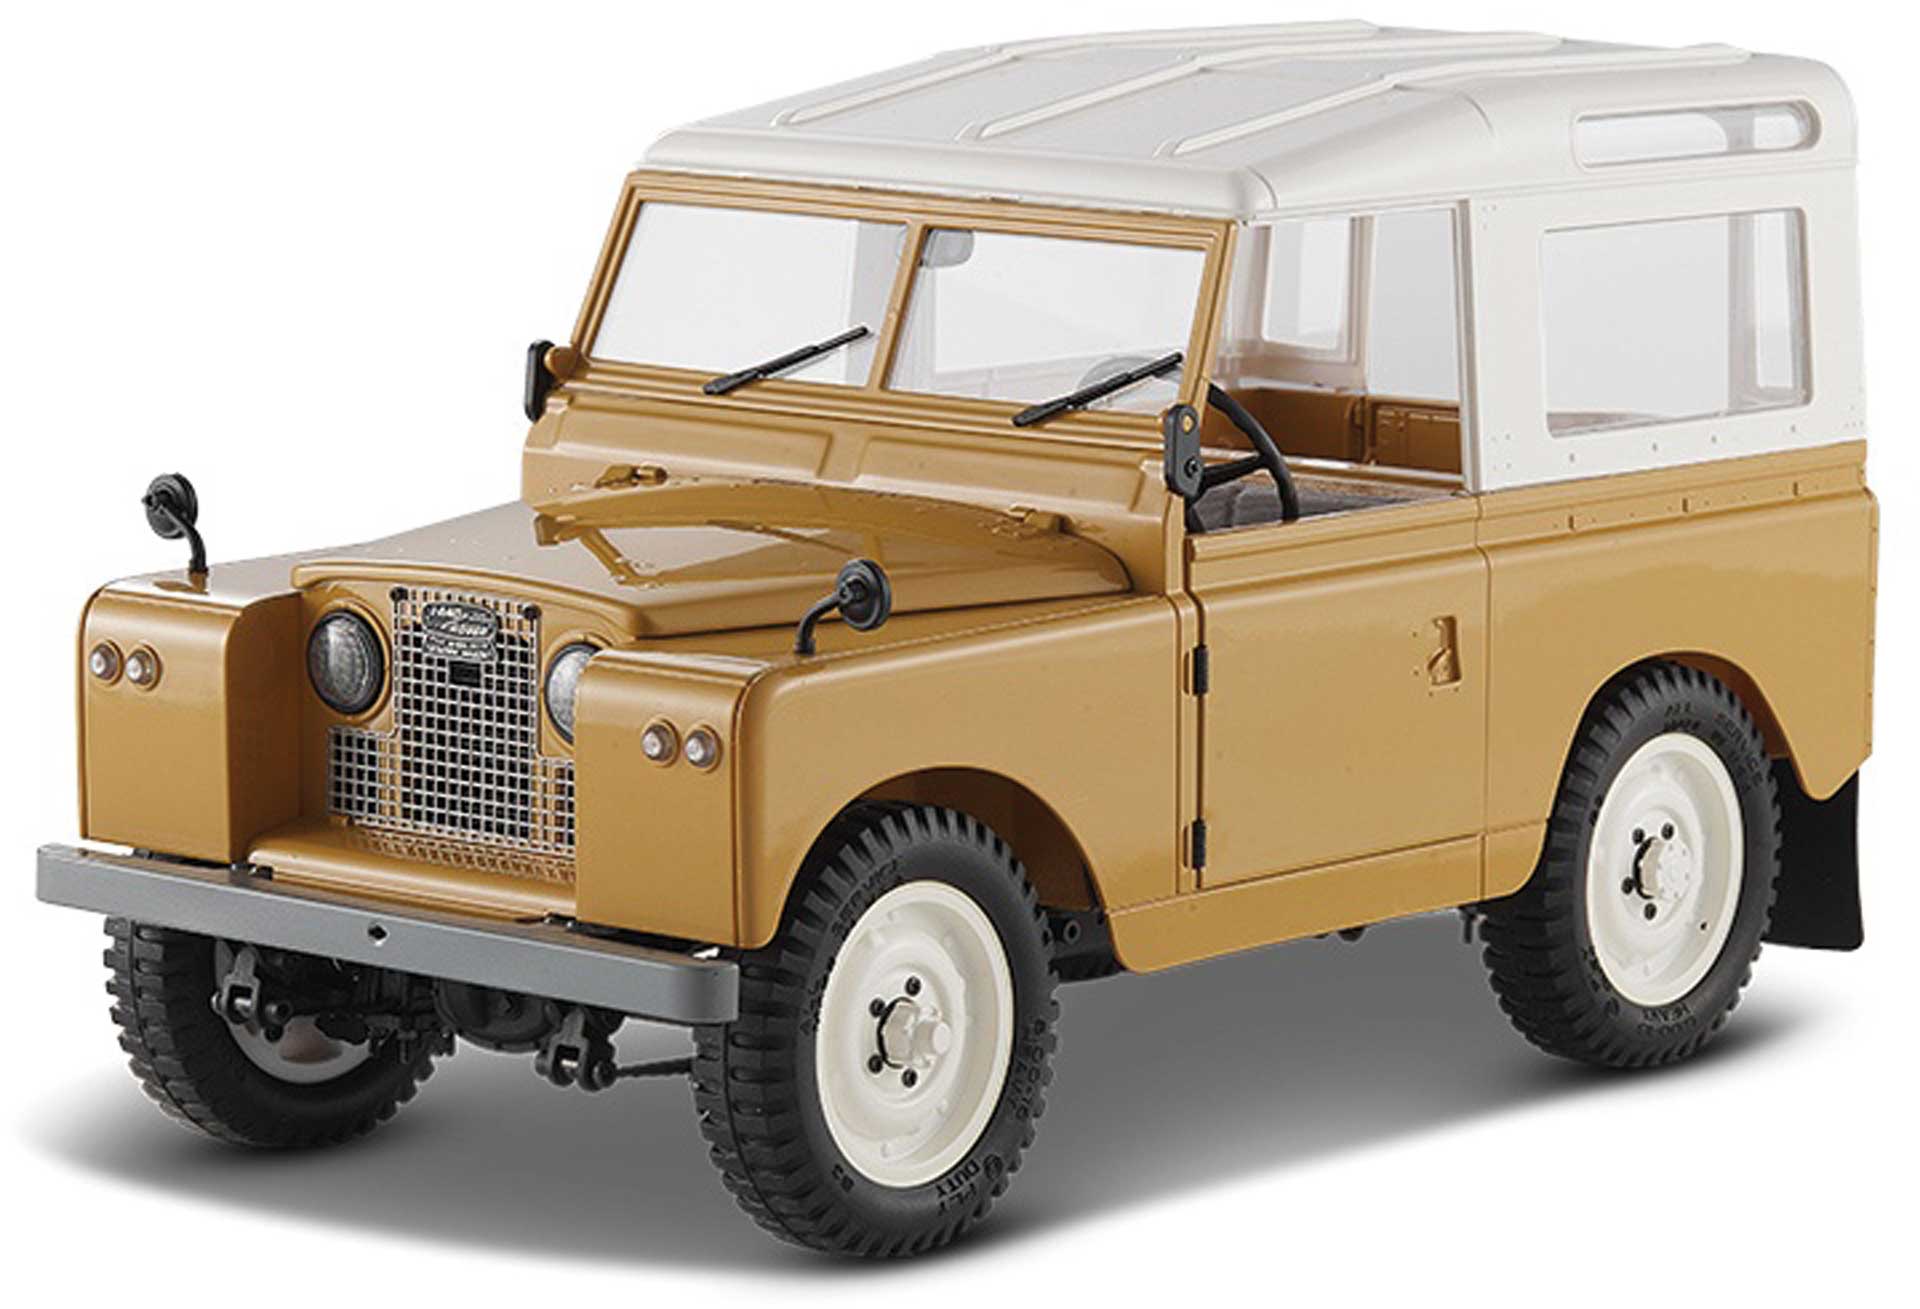 FMS Land Rover Series II yellow 1:12 - Crawler RTR 2.4GHz